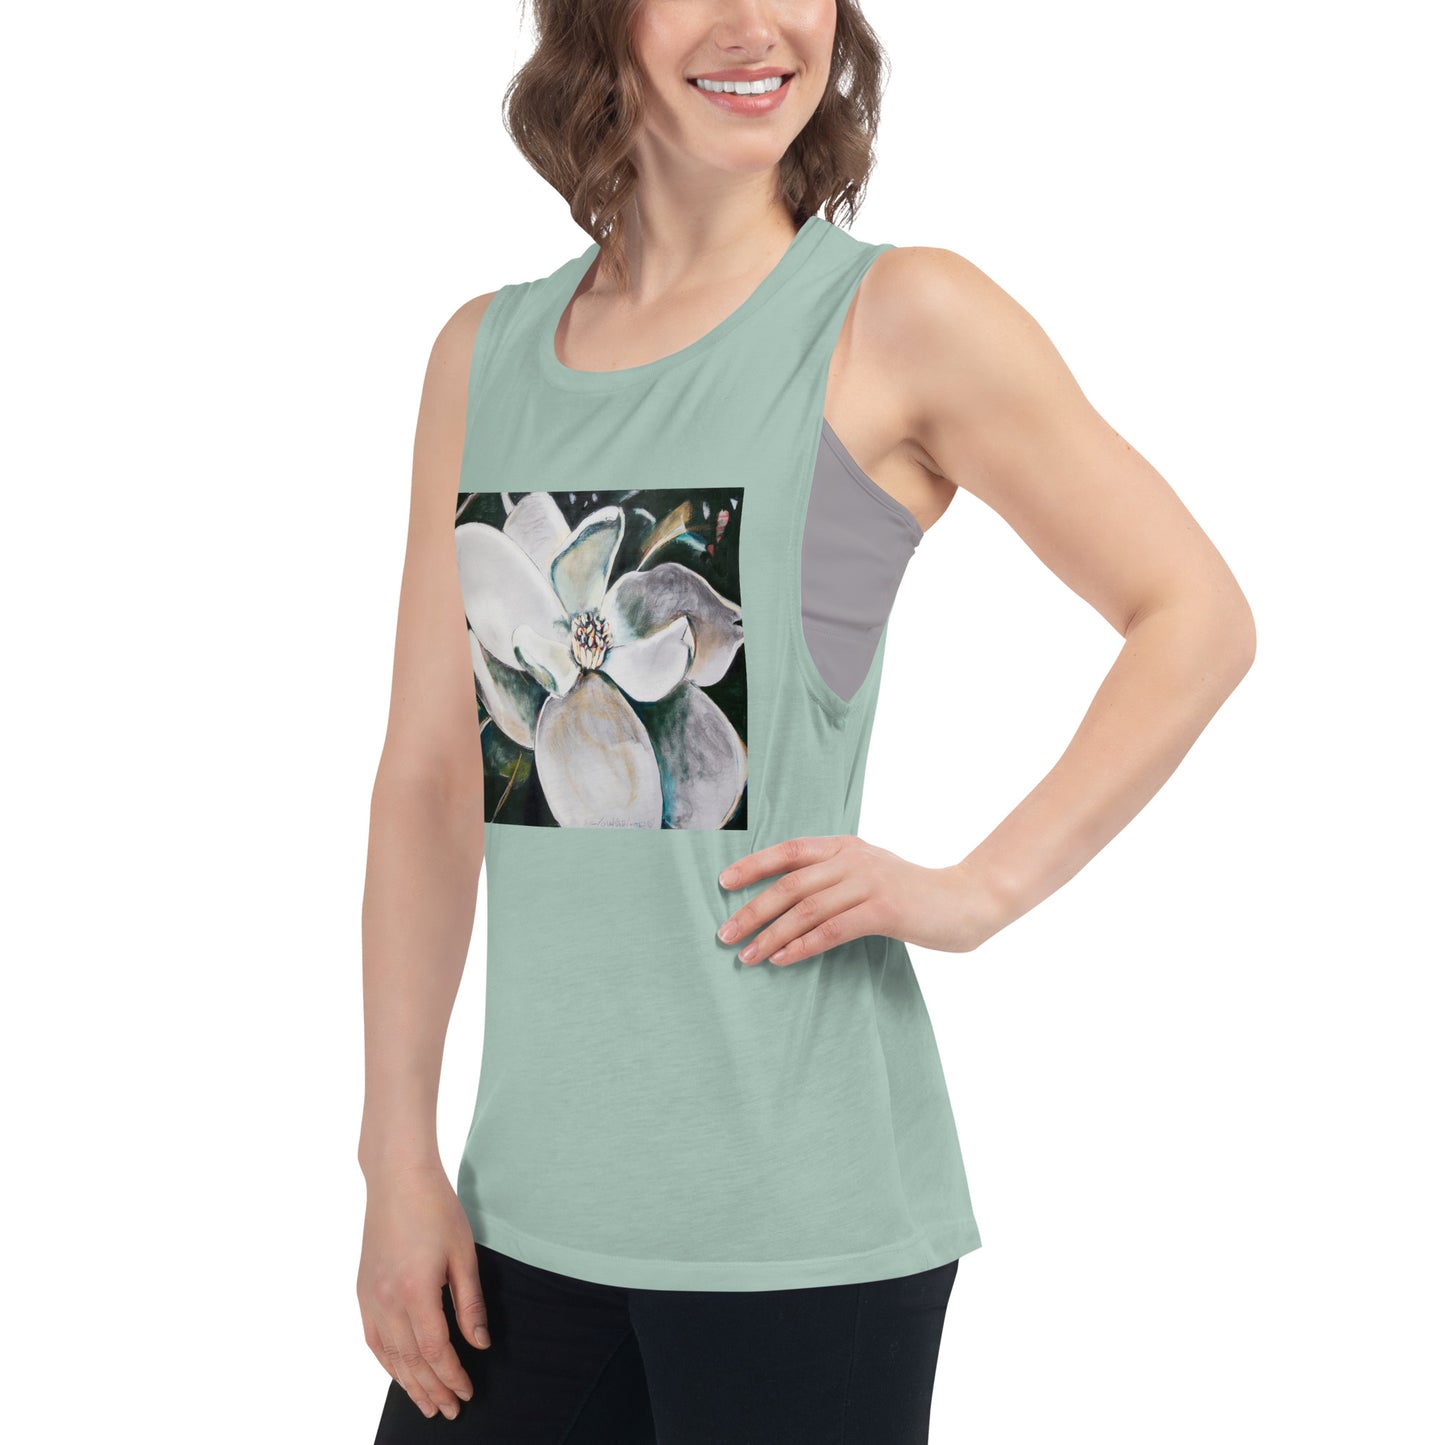 Magnolia with Her Heart Open Ladies’ Muscle Tank